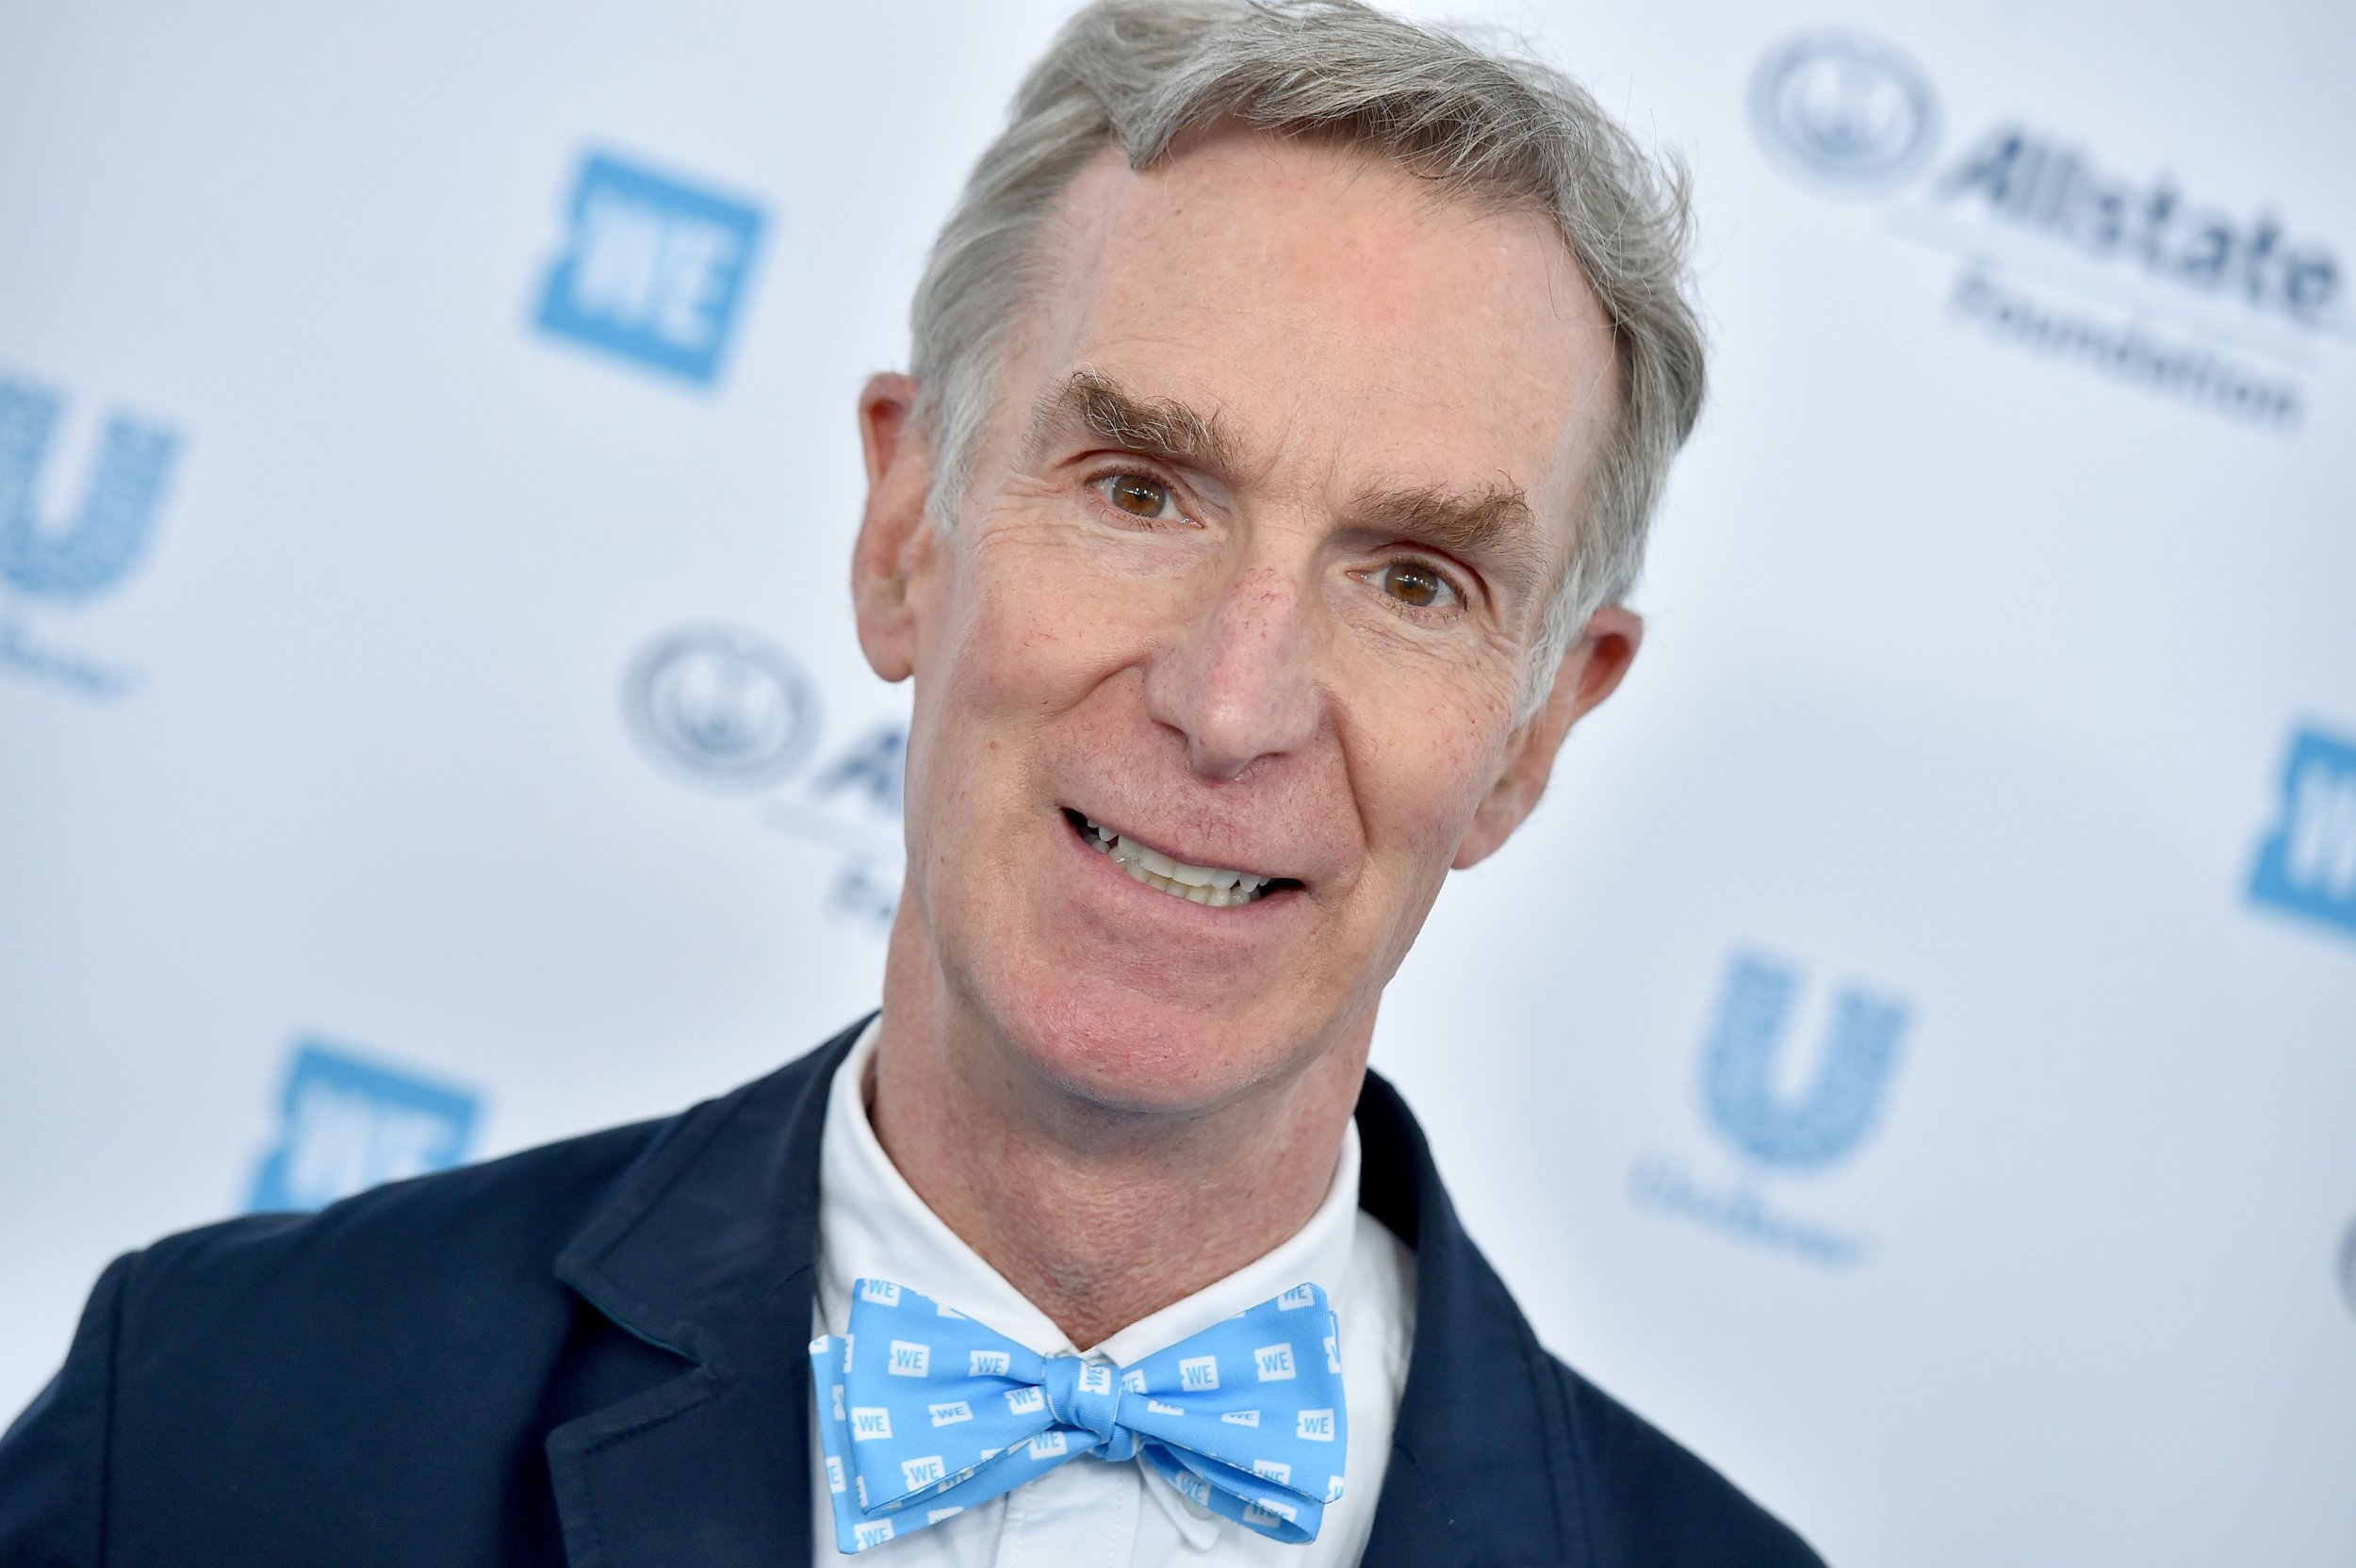 Bill Nye Explains Global Warming to Adults 'The Is on F***ing Fire'